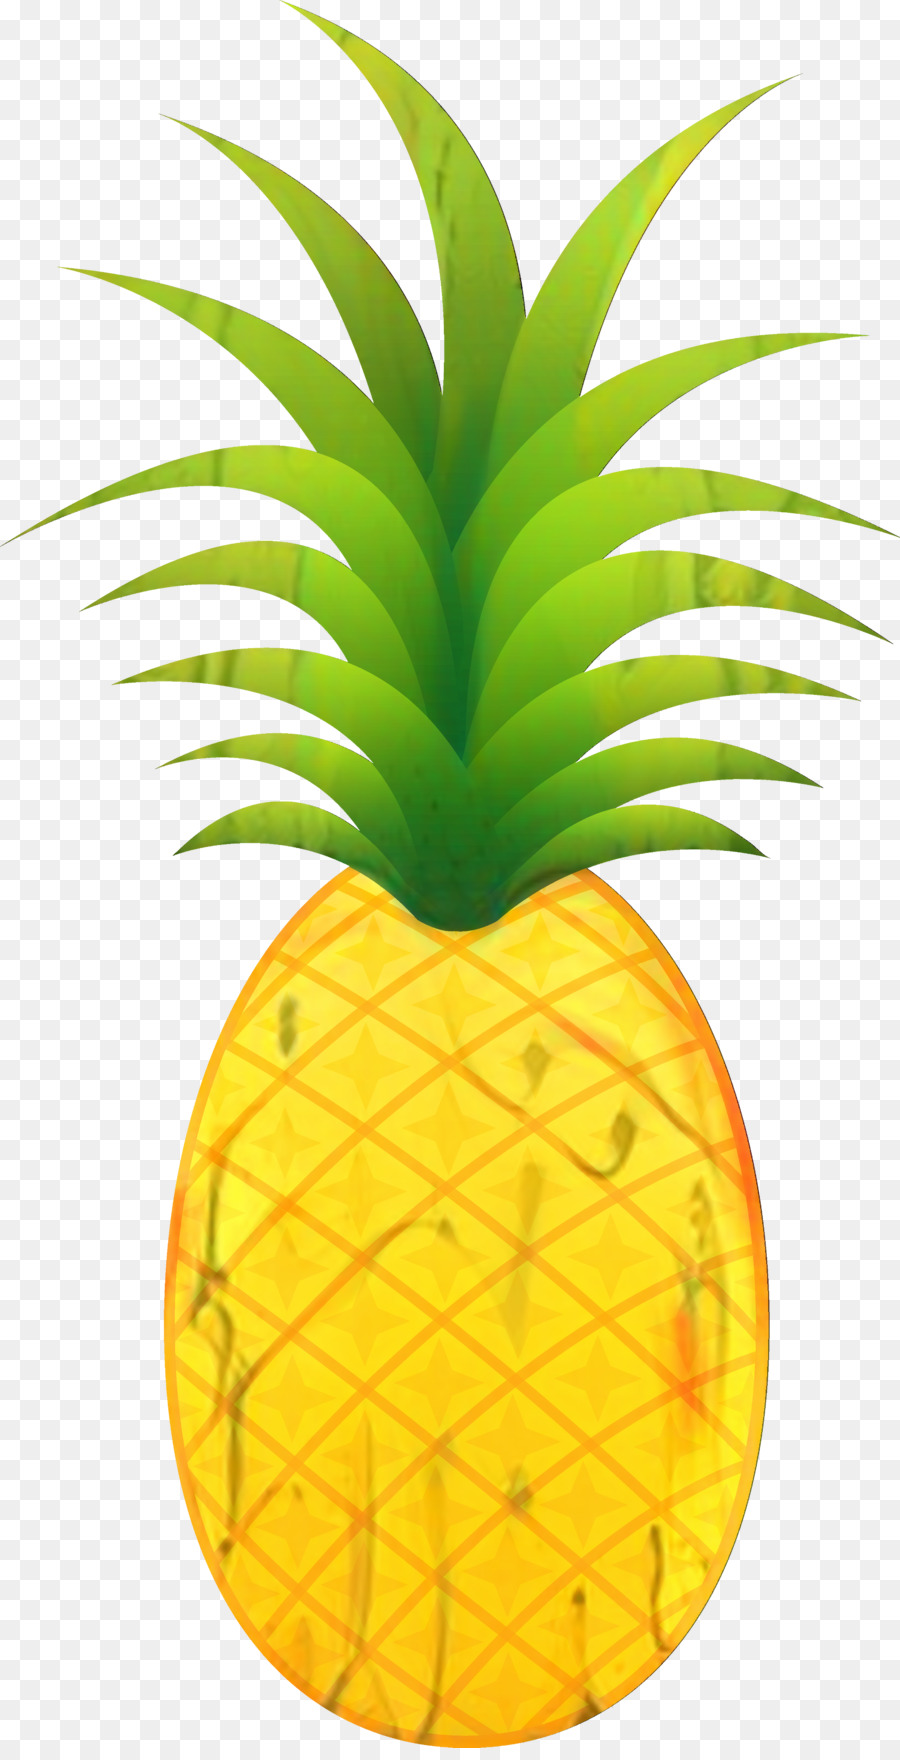 Pineapple Clip art Portable Network Graphics Image Transparency -  png download - 1829*3552 - Free Transparent Pineapple png Download.